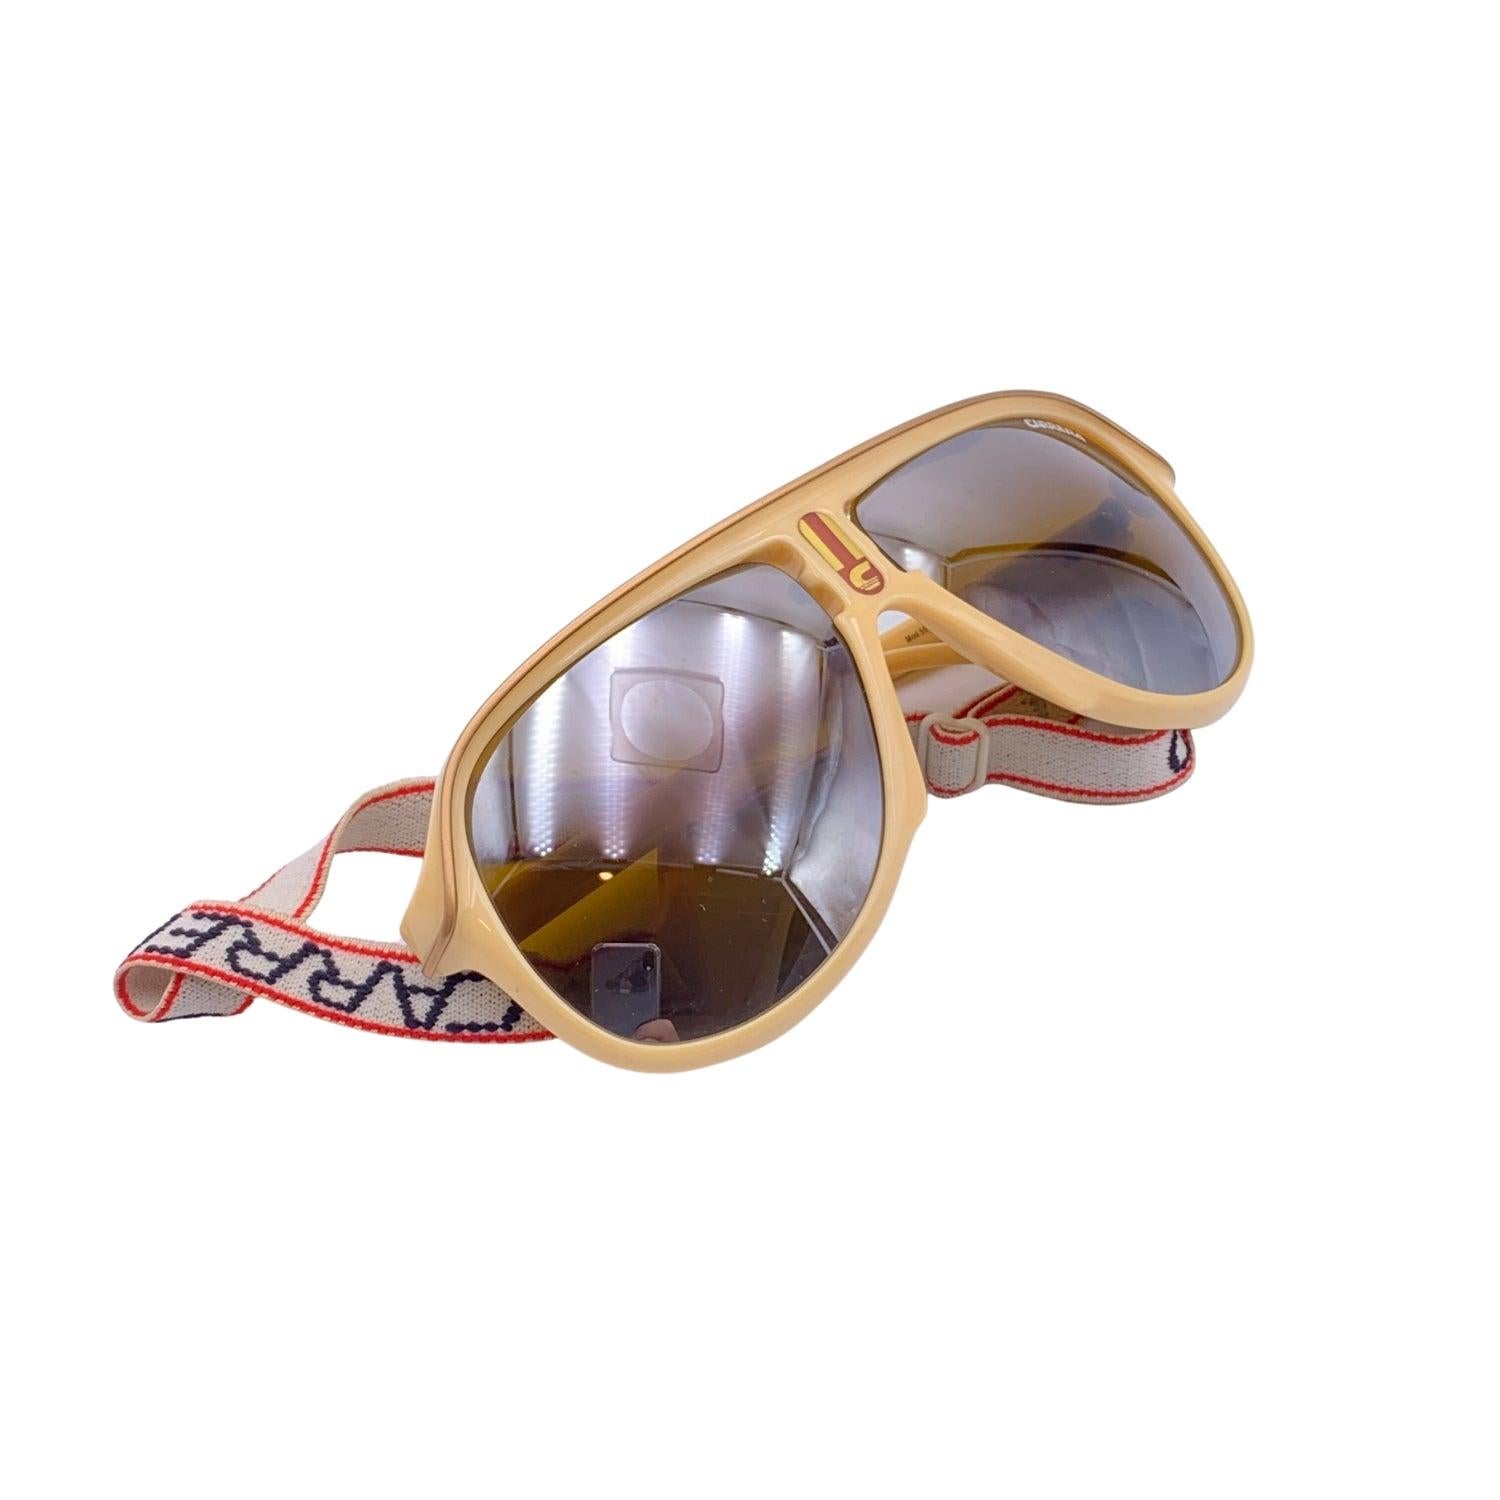 Vintage Carrera Sport Aviator Beige Sunglasses. Model: 5544 70. Size: 63/13 130mm. Beige acetate frame and beige temples with the original elastic band. 100% Total UVA/UVB protection. Gradient Brown lenses. Carrera branding to the bridge and on the